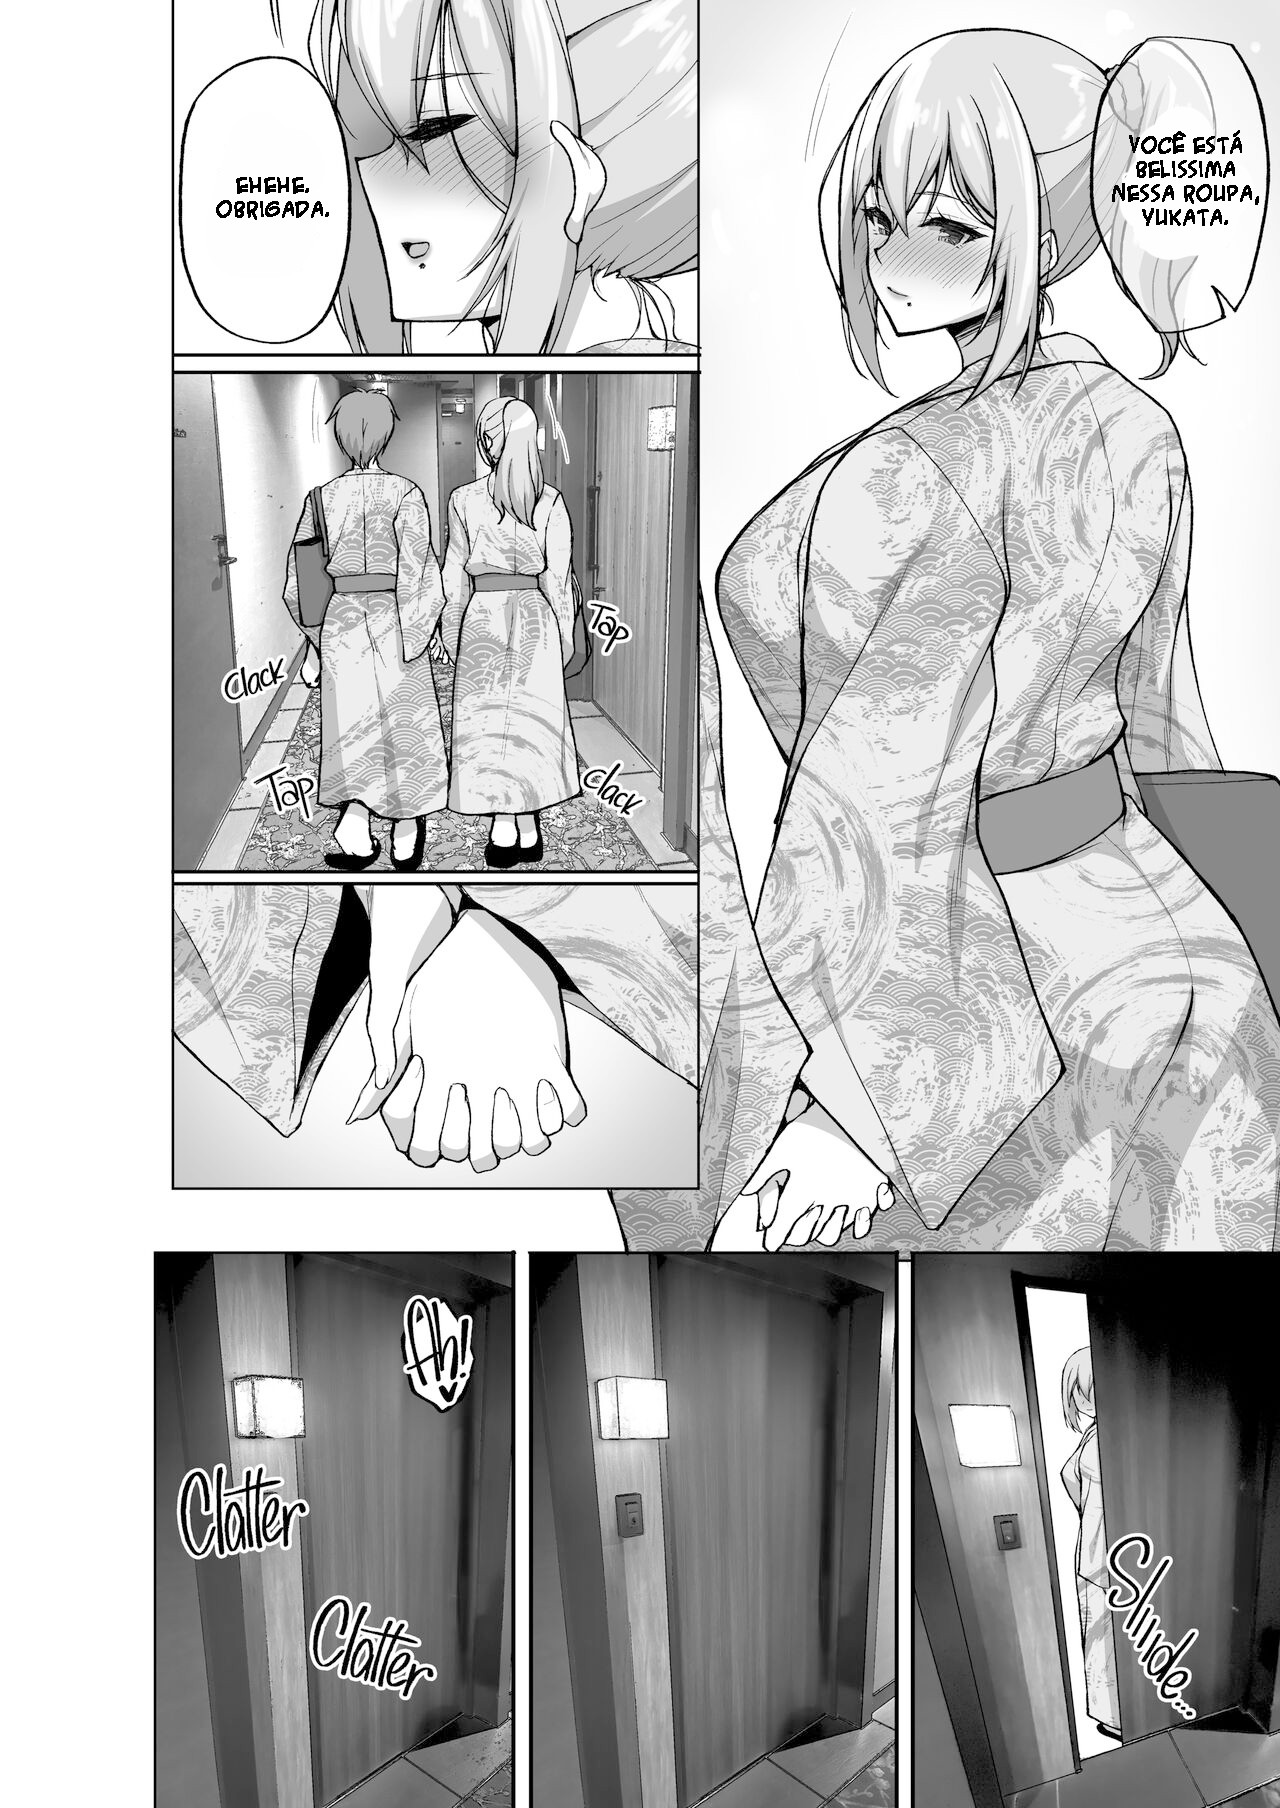 Do You Like Naughty Older Girls? Part 5: Steamy Hot Springs Trip With The Girl Next Door Hentai pt-br 15